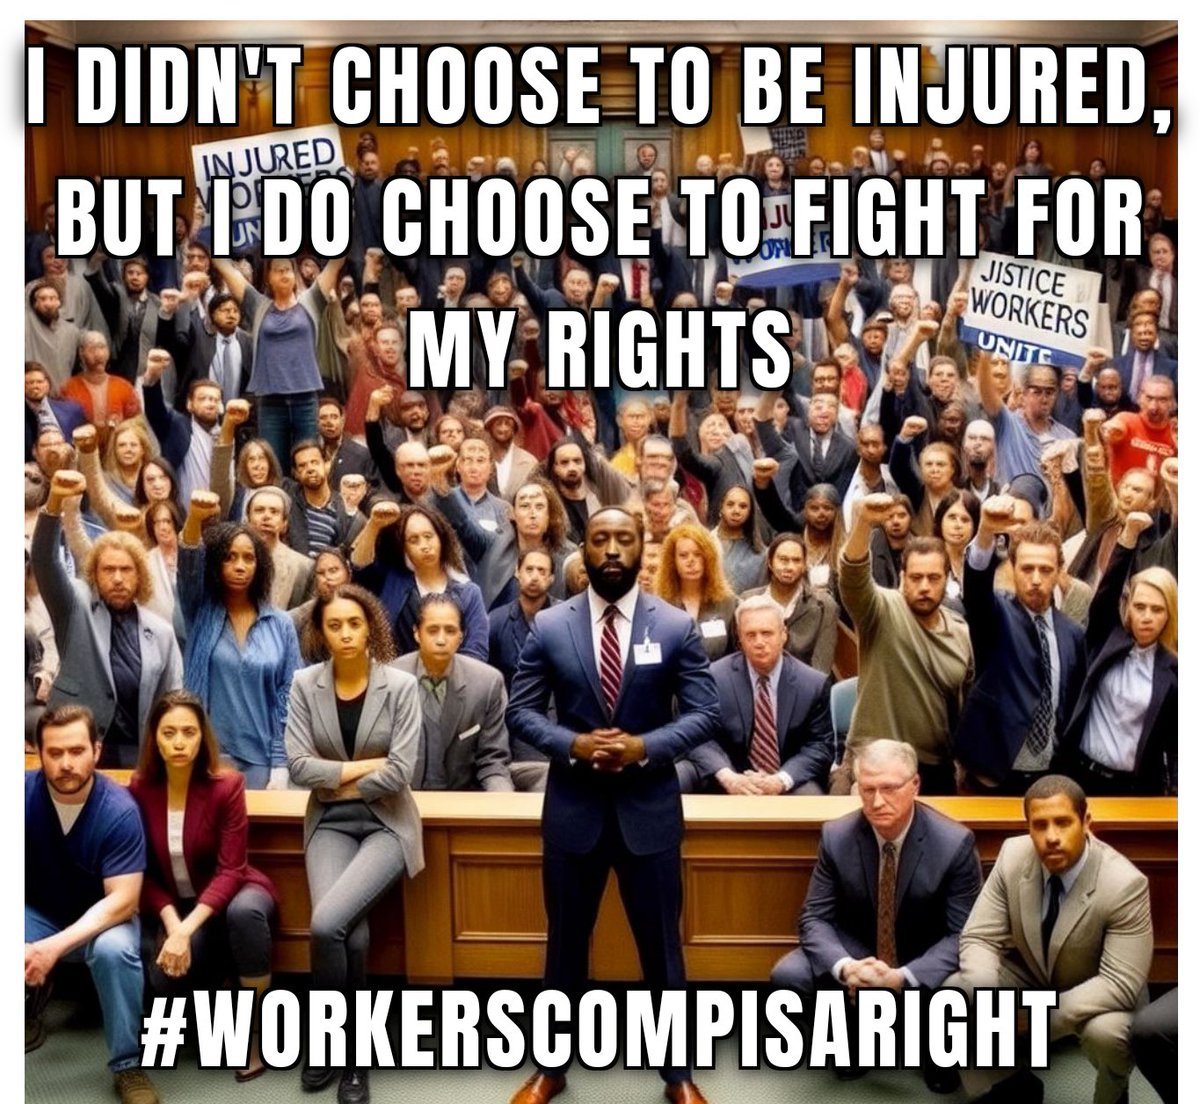 Injured workers: I didn't choose to be injured, but I do choose to fight for my rights! #WorkersCompIsARight 
Let's stand together for justice and fair treatment. #InjuredWorkers #FightForRights